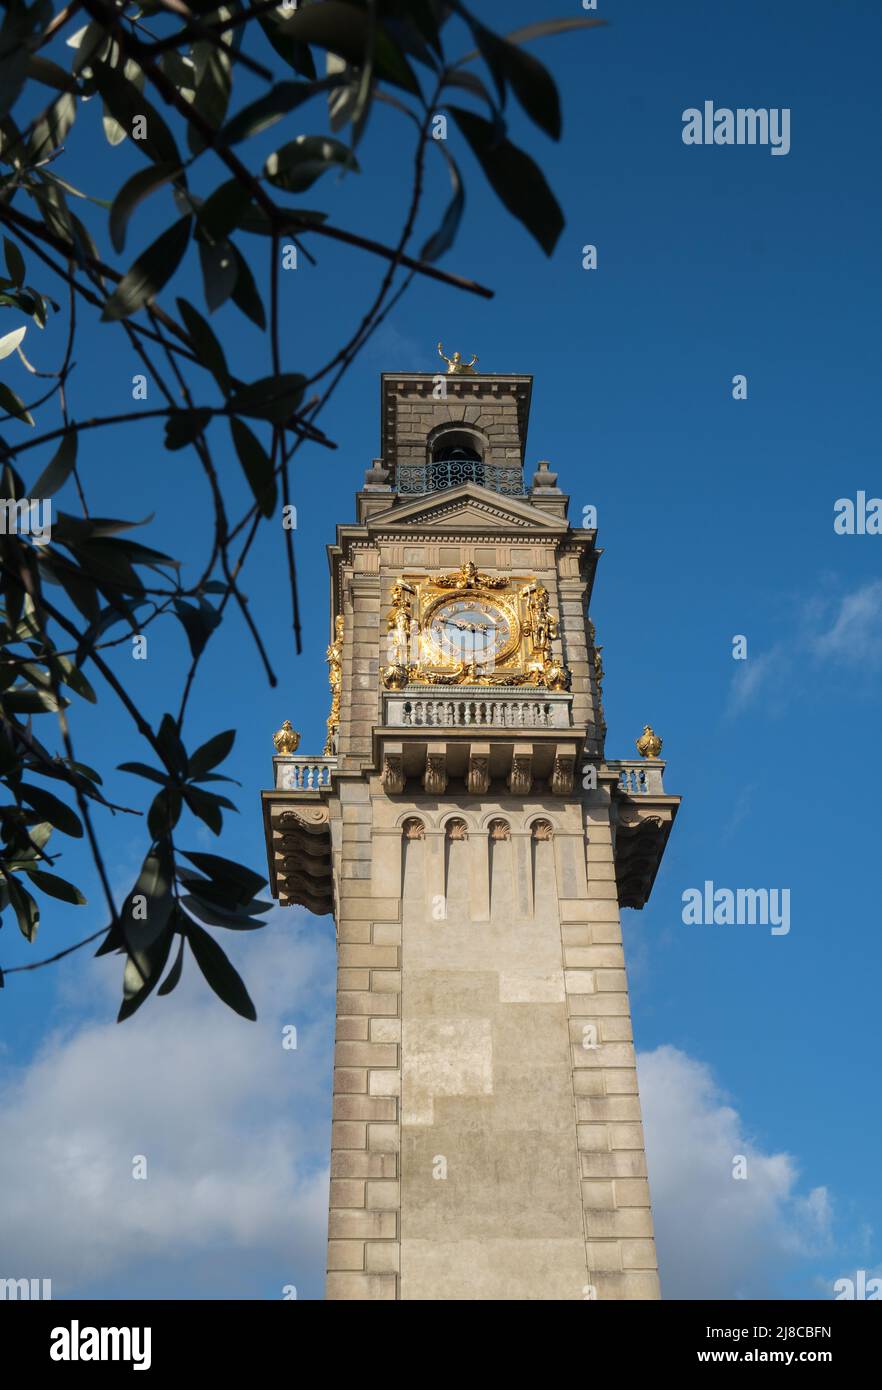 The upper part of the Clocktower at Cliveden House, Berkshire Stock Photo